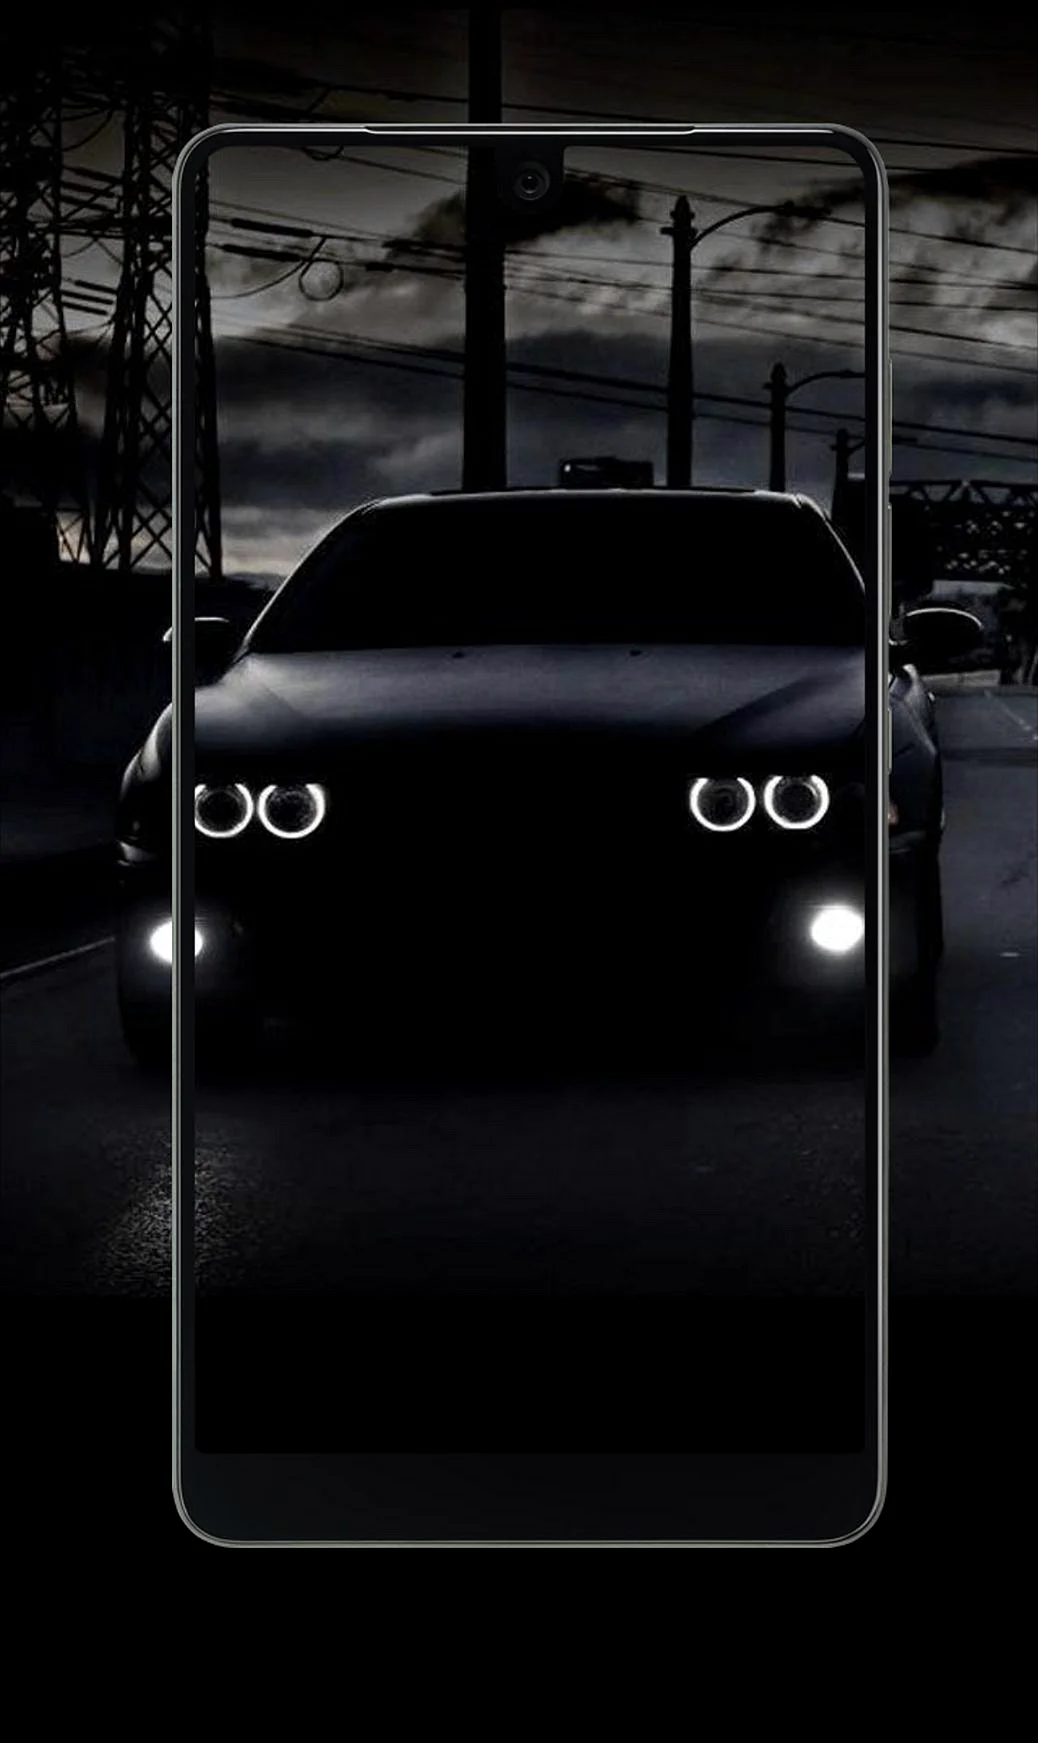 Bmw Wallpaper For iPhone